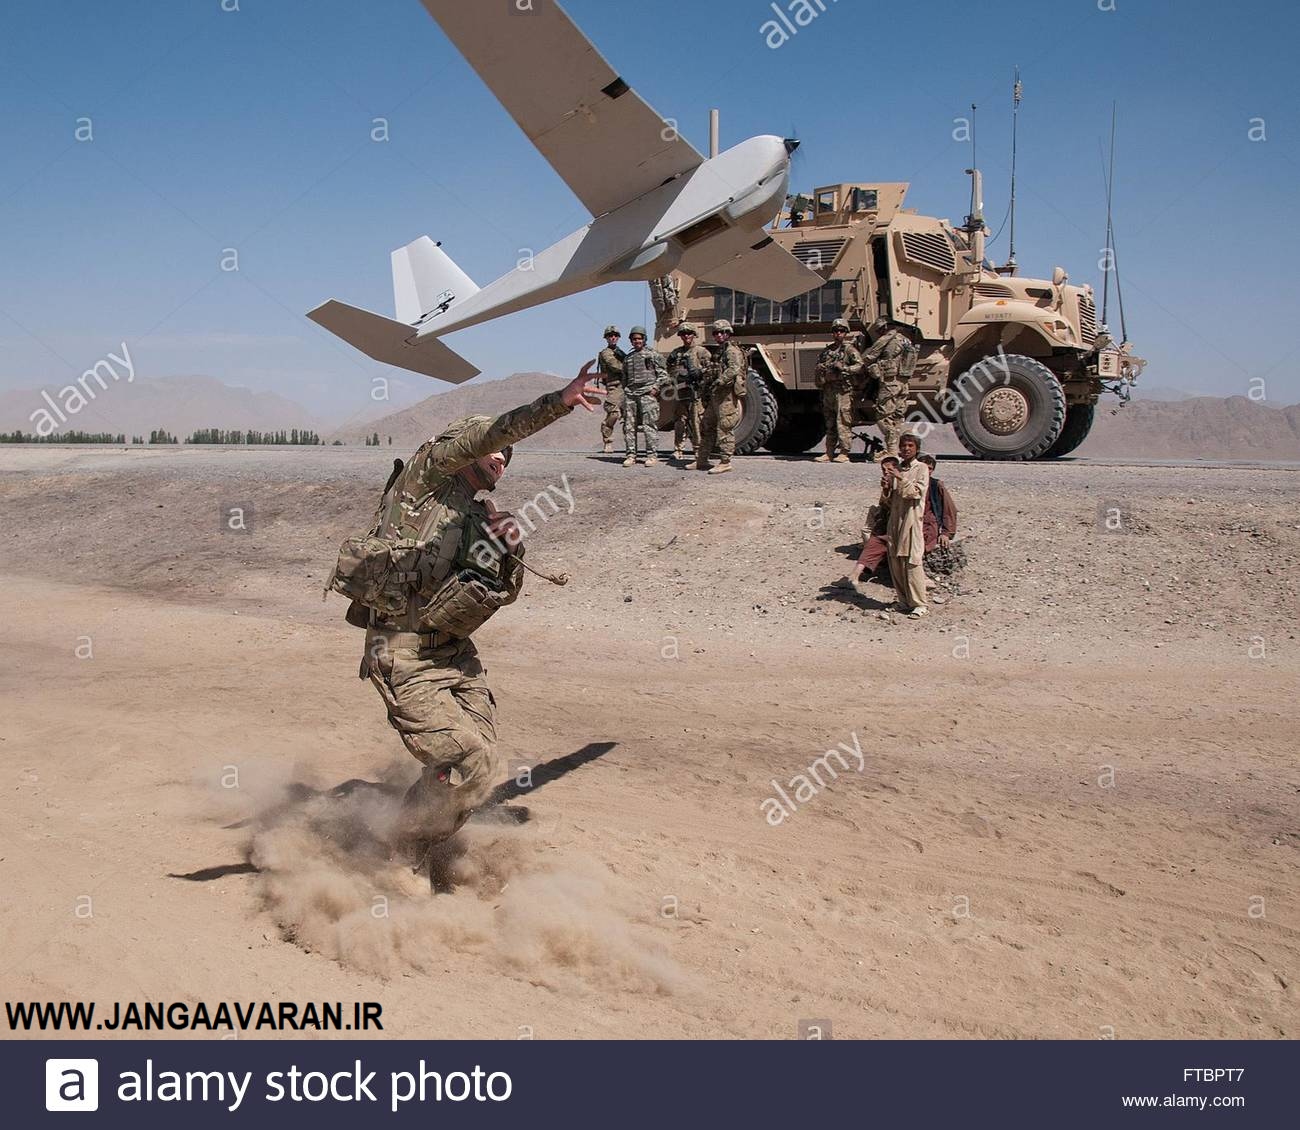 https://jangaavaran.ir/wp-content/uploads/2020/12/a-us-army-paratrooper-with-the-82nd-airborne-hand-launches-a-puma-FTBPT7.jpg